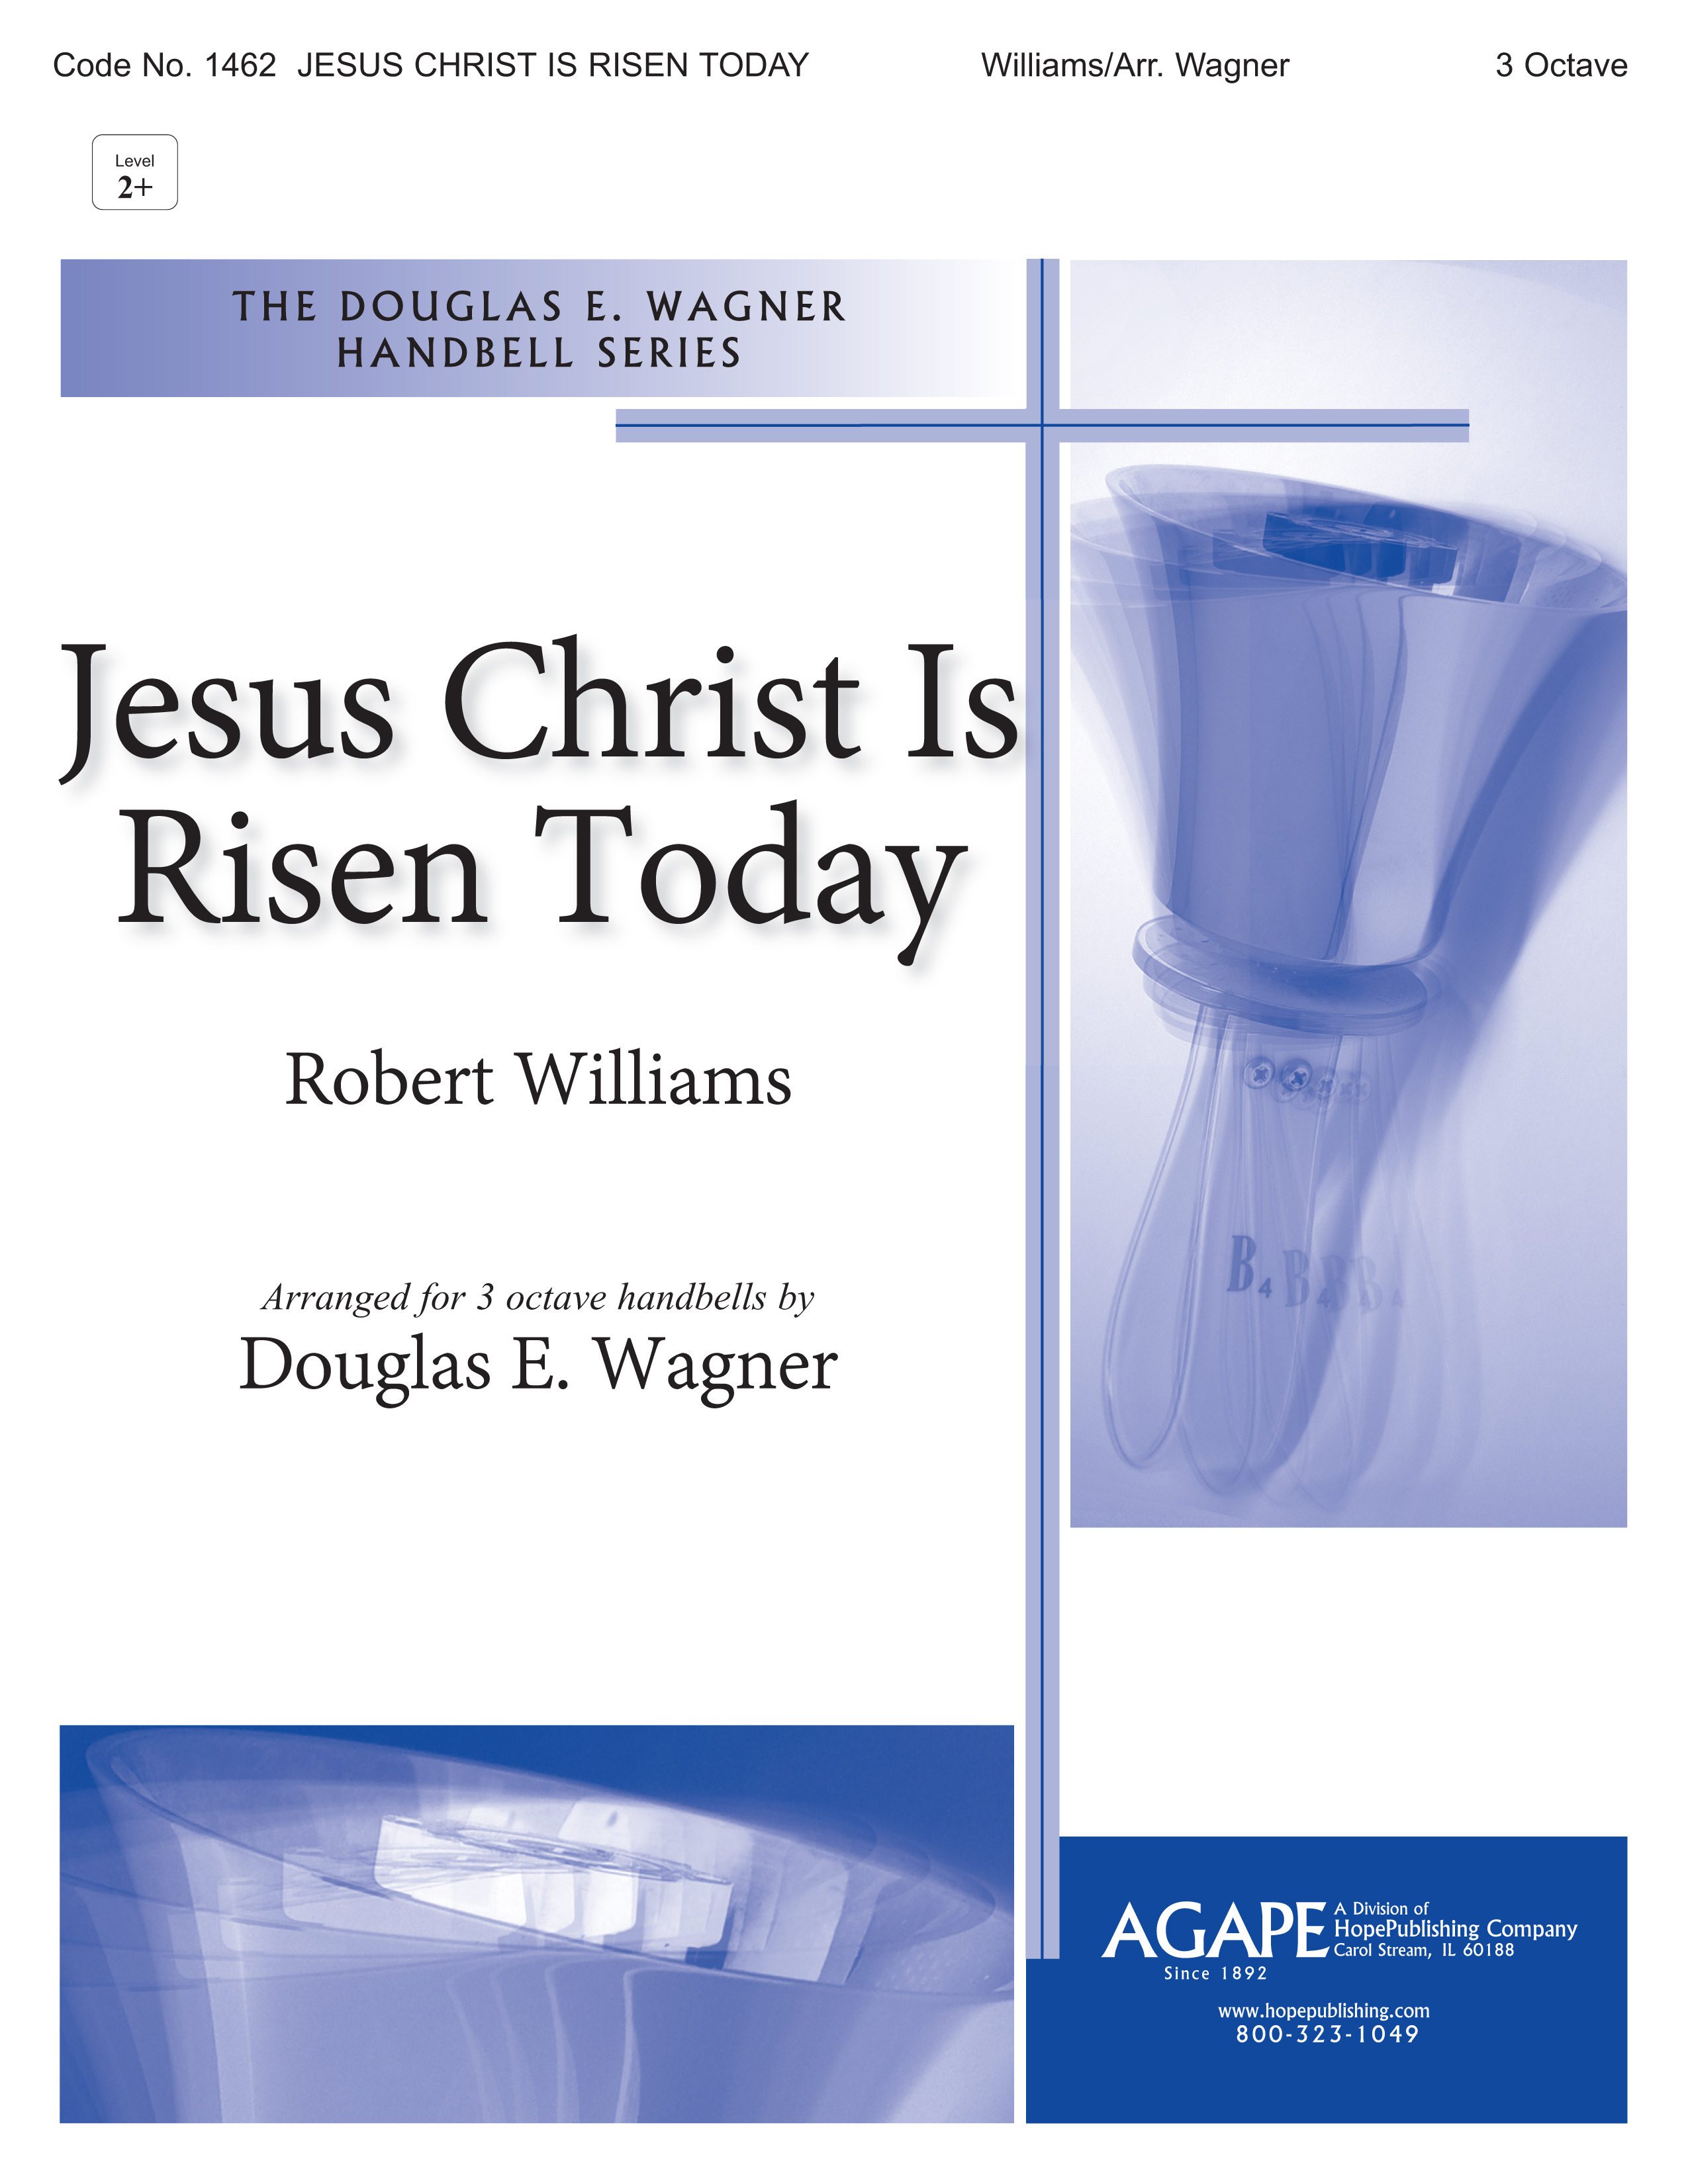 Jesus Christ Is Risen Today - 3 Octave Cover Image